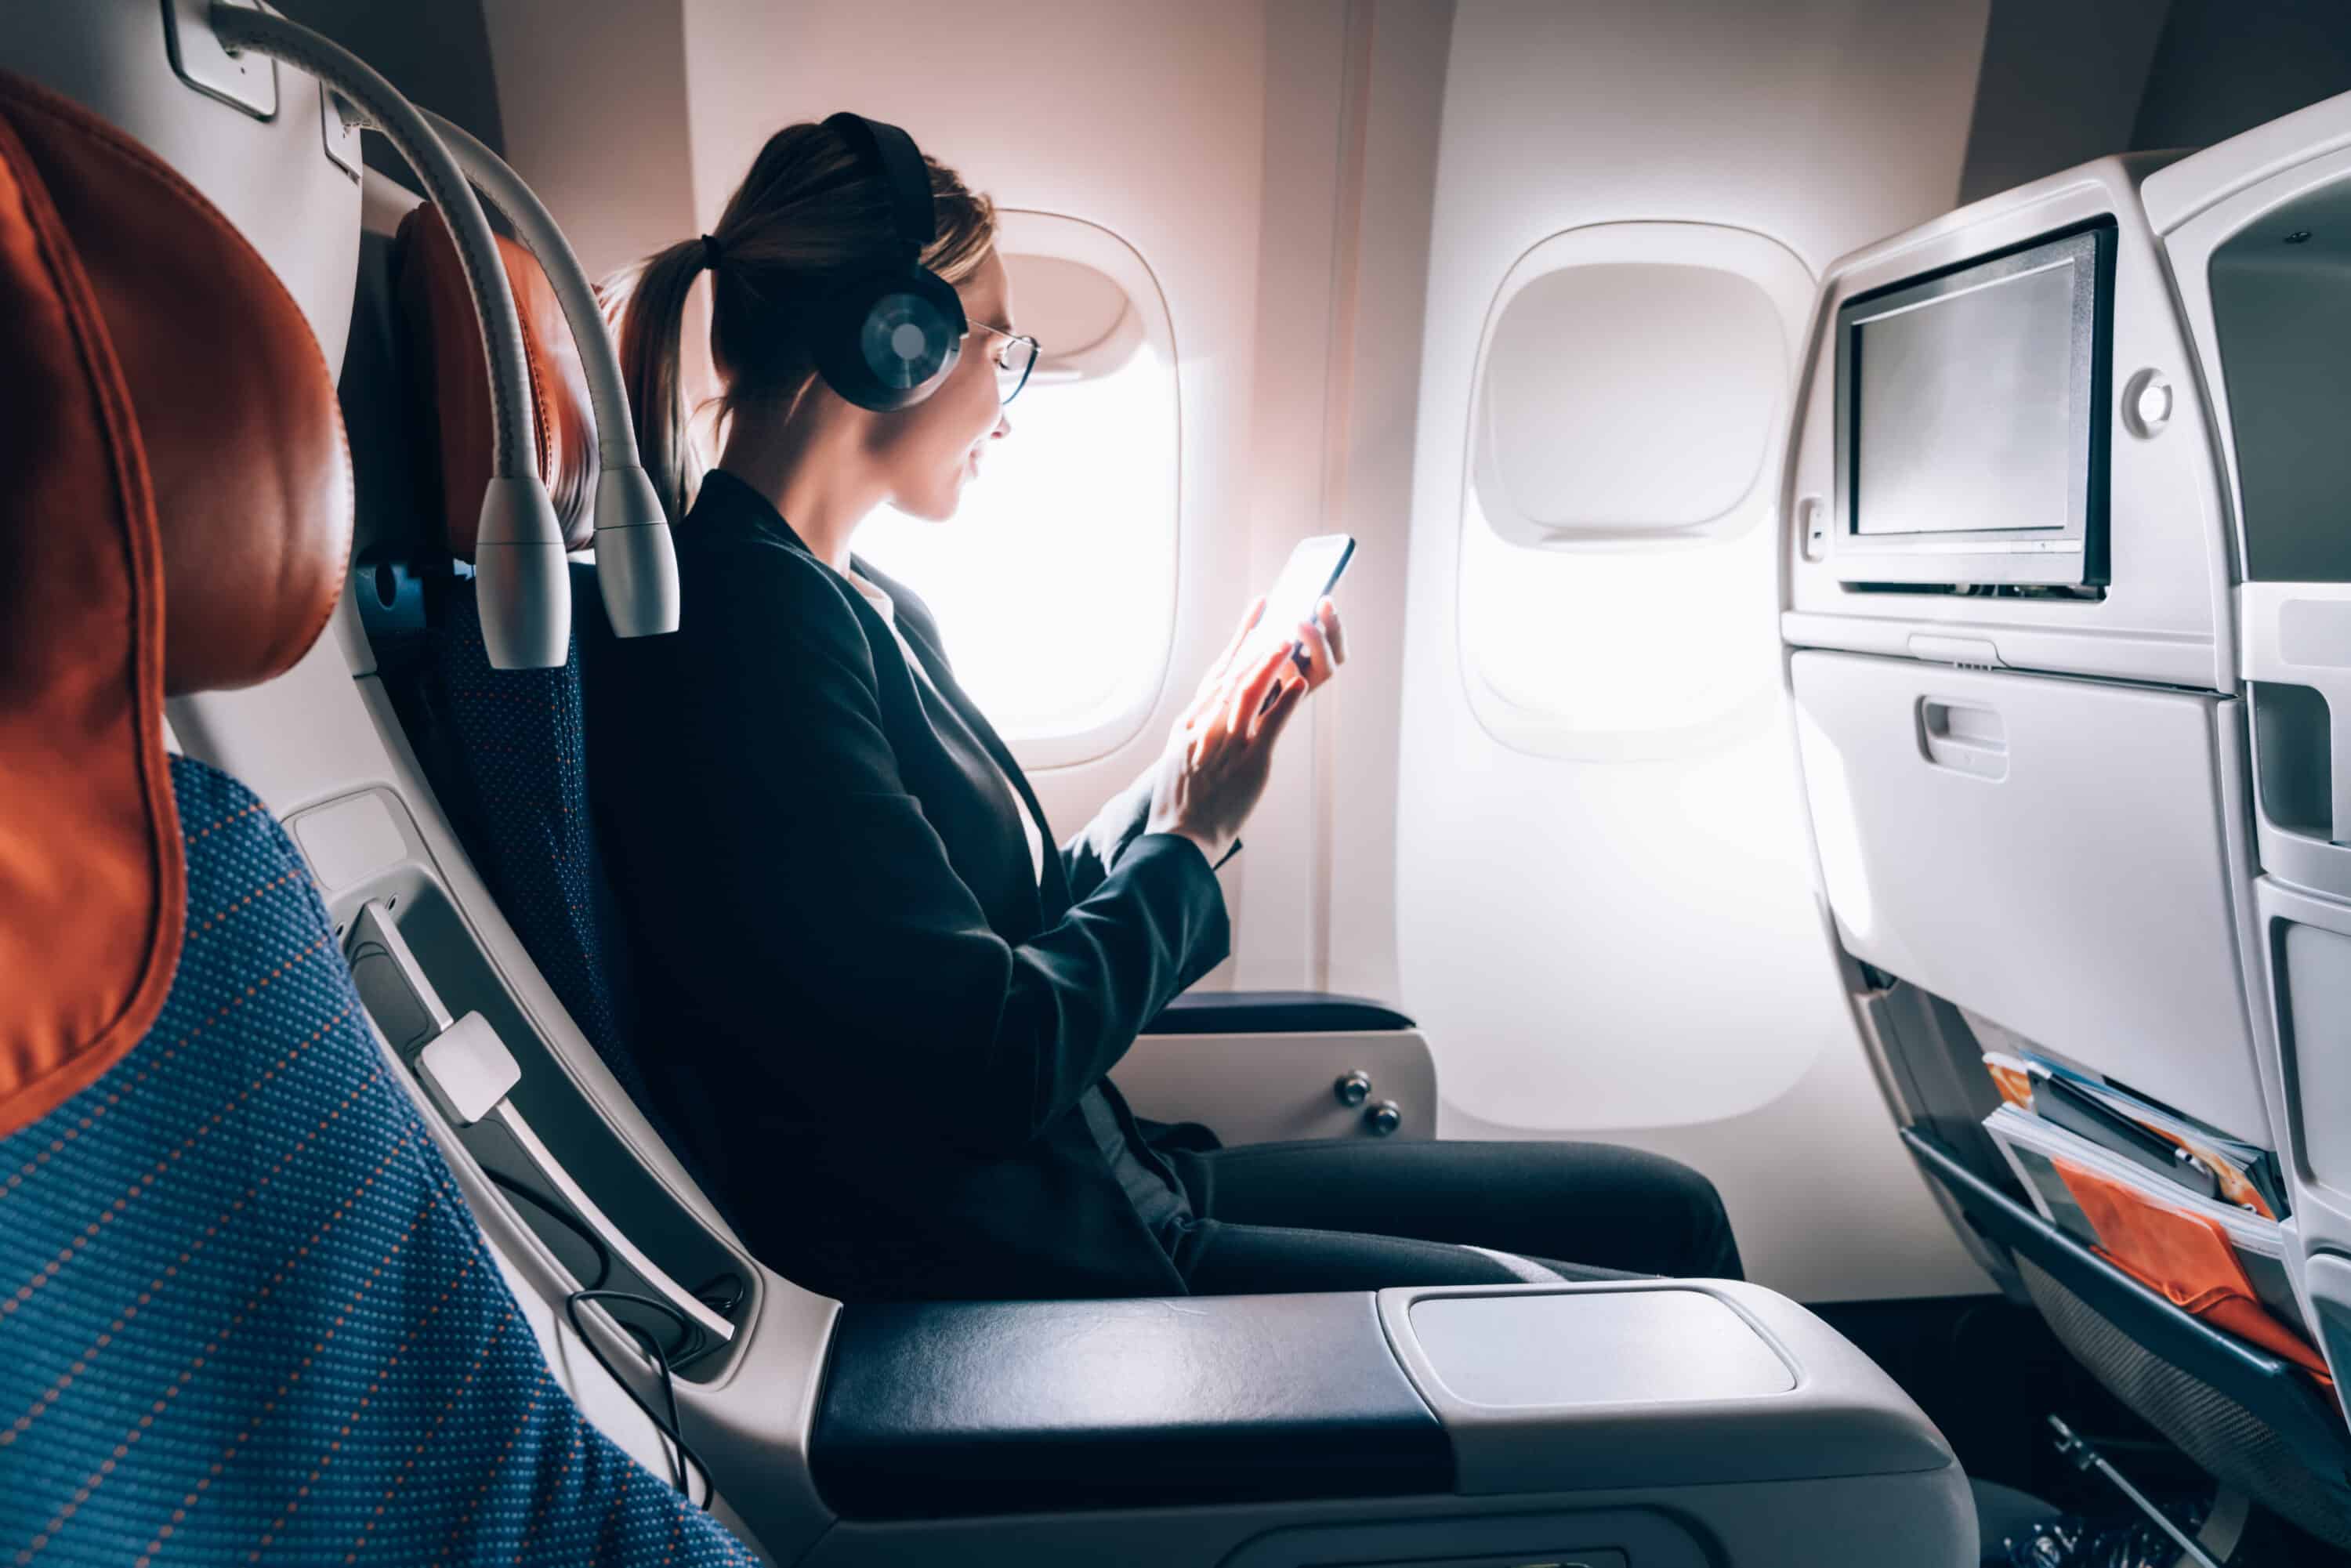 Woman sitting on a plane reading her phone with noise cancelling headphones on.